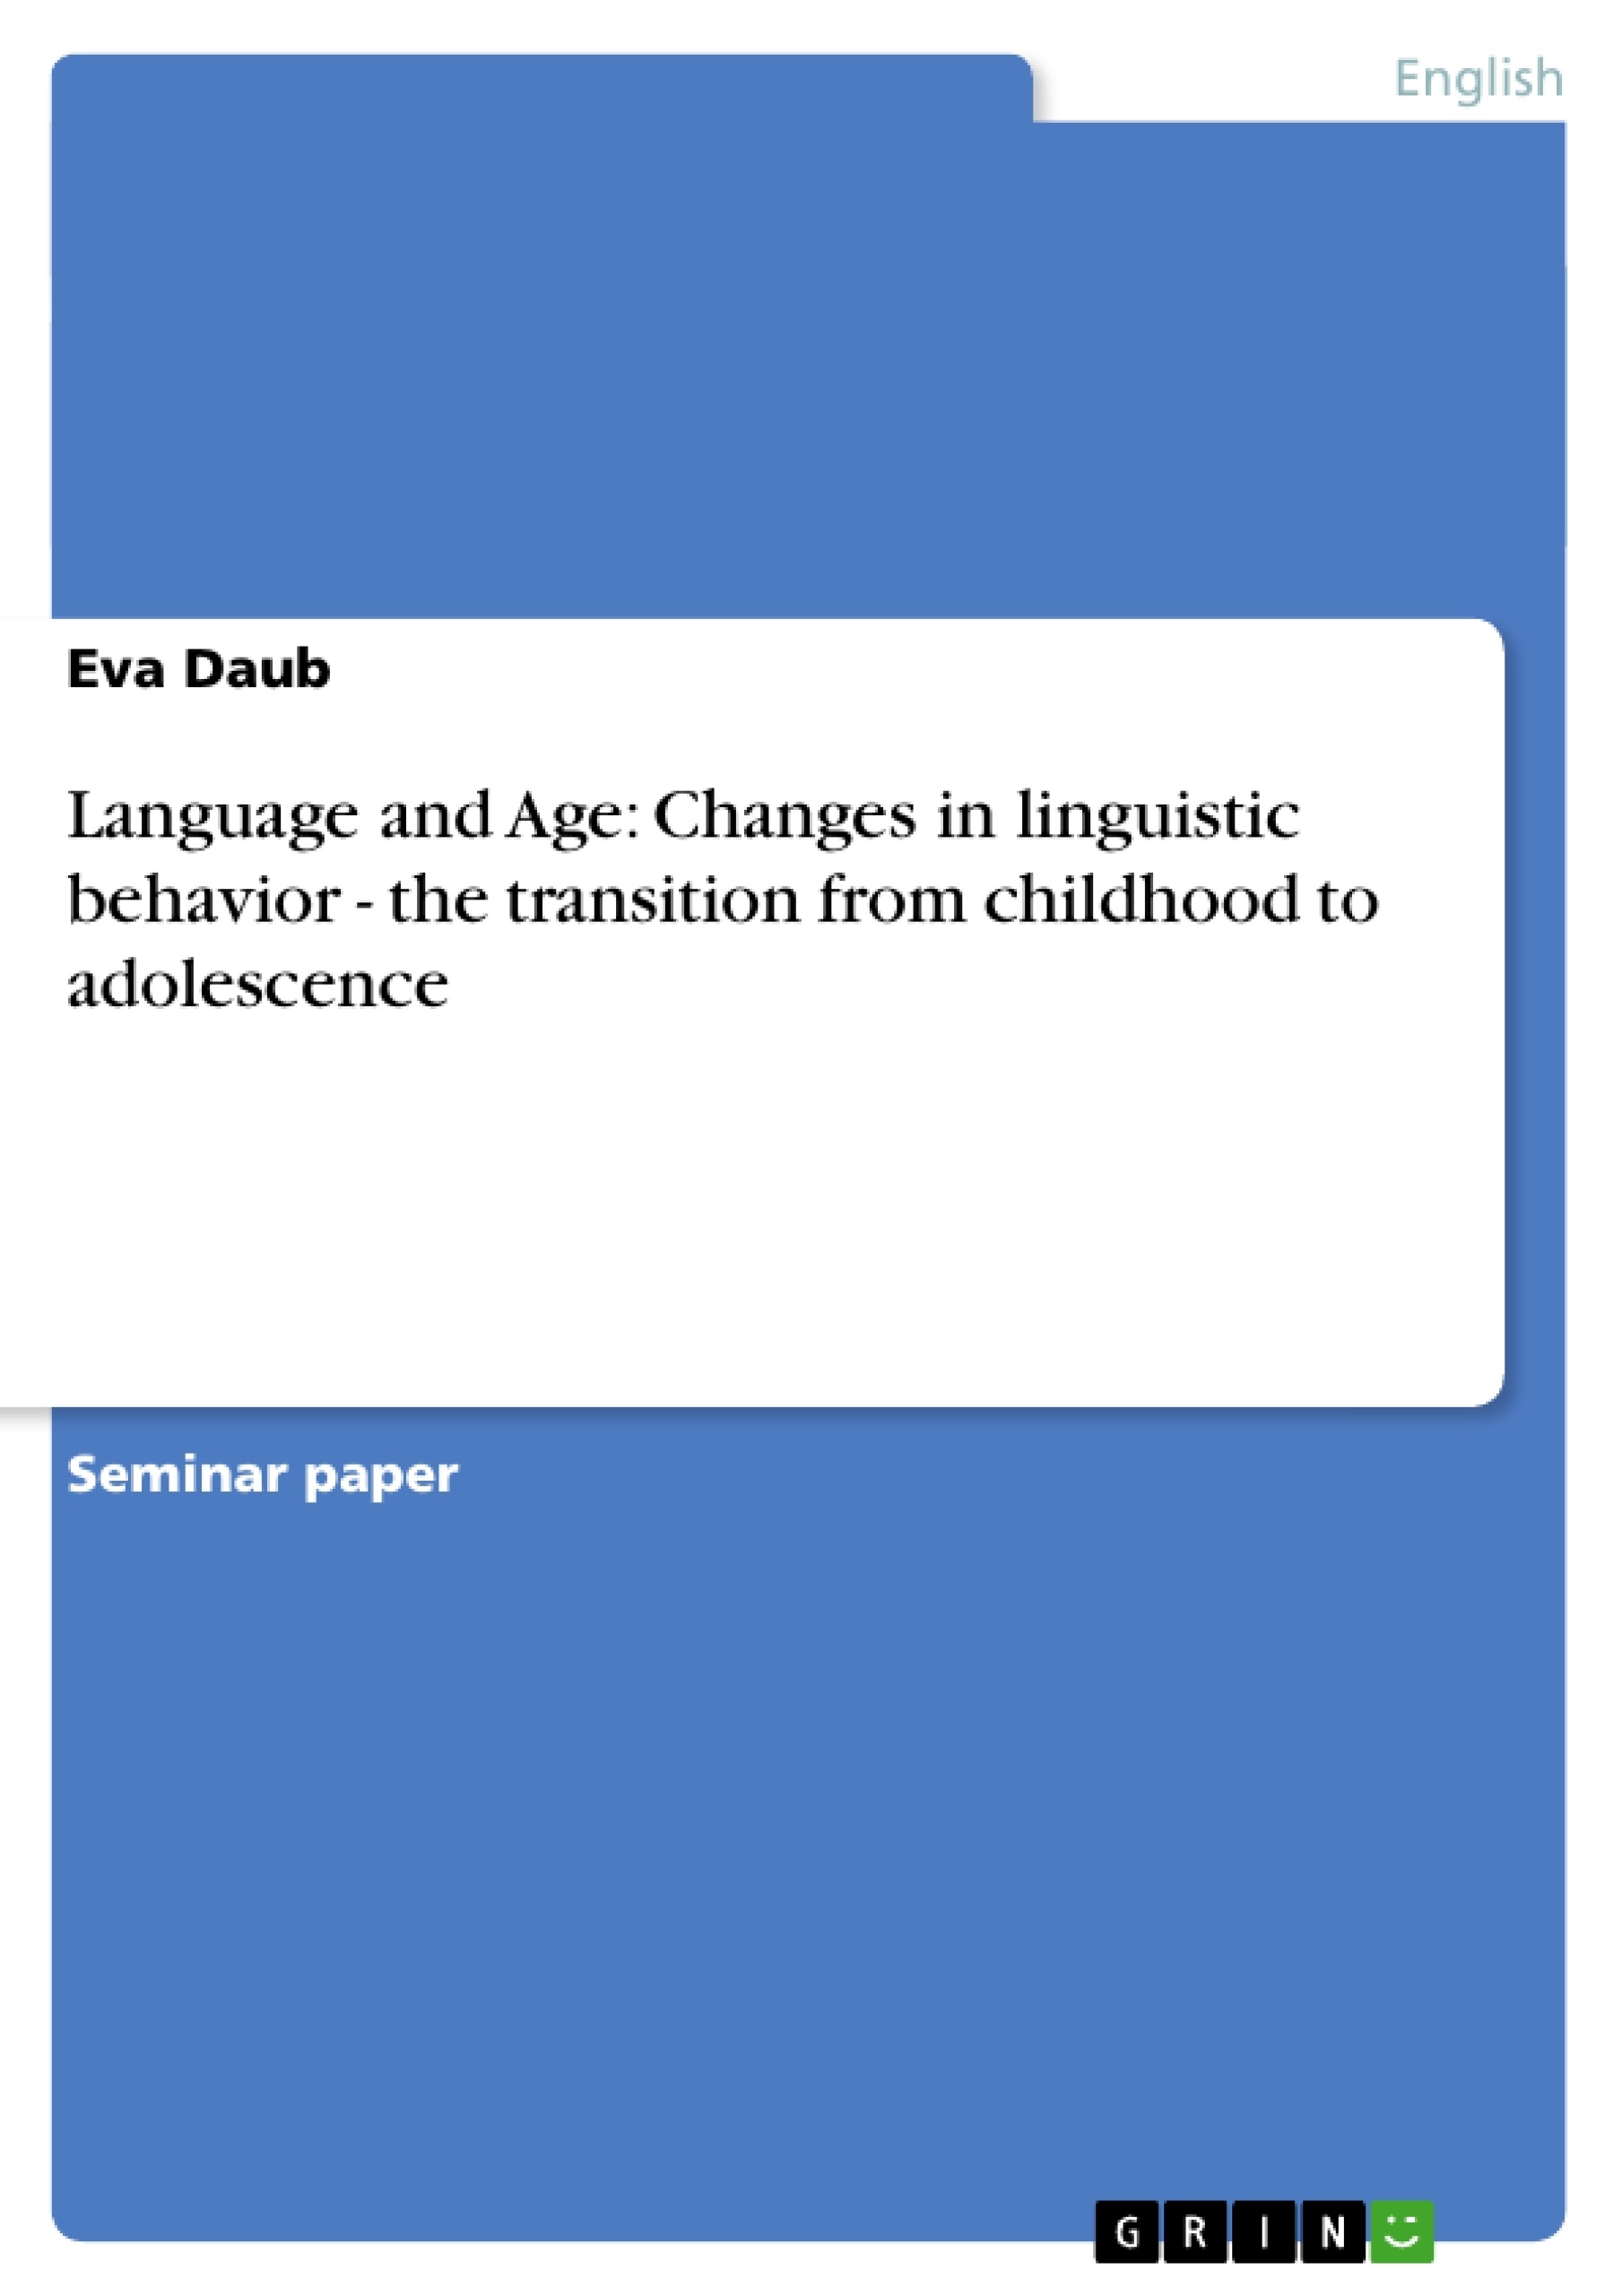 Title: Language and Age: Changes in linguistic behavior - the transition from childhood to adolescence